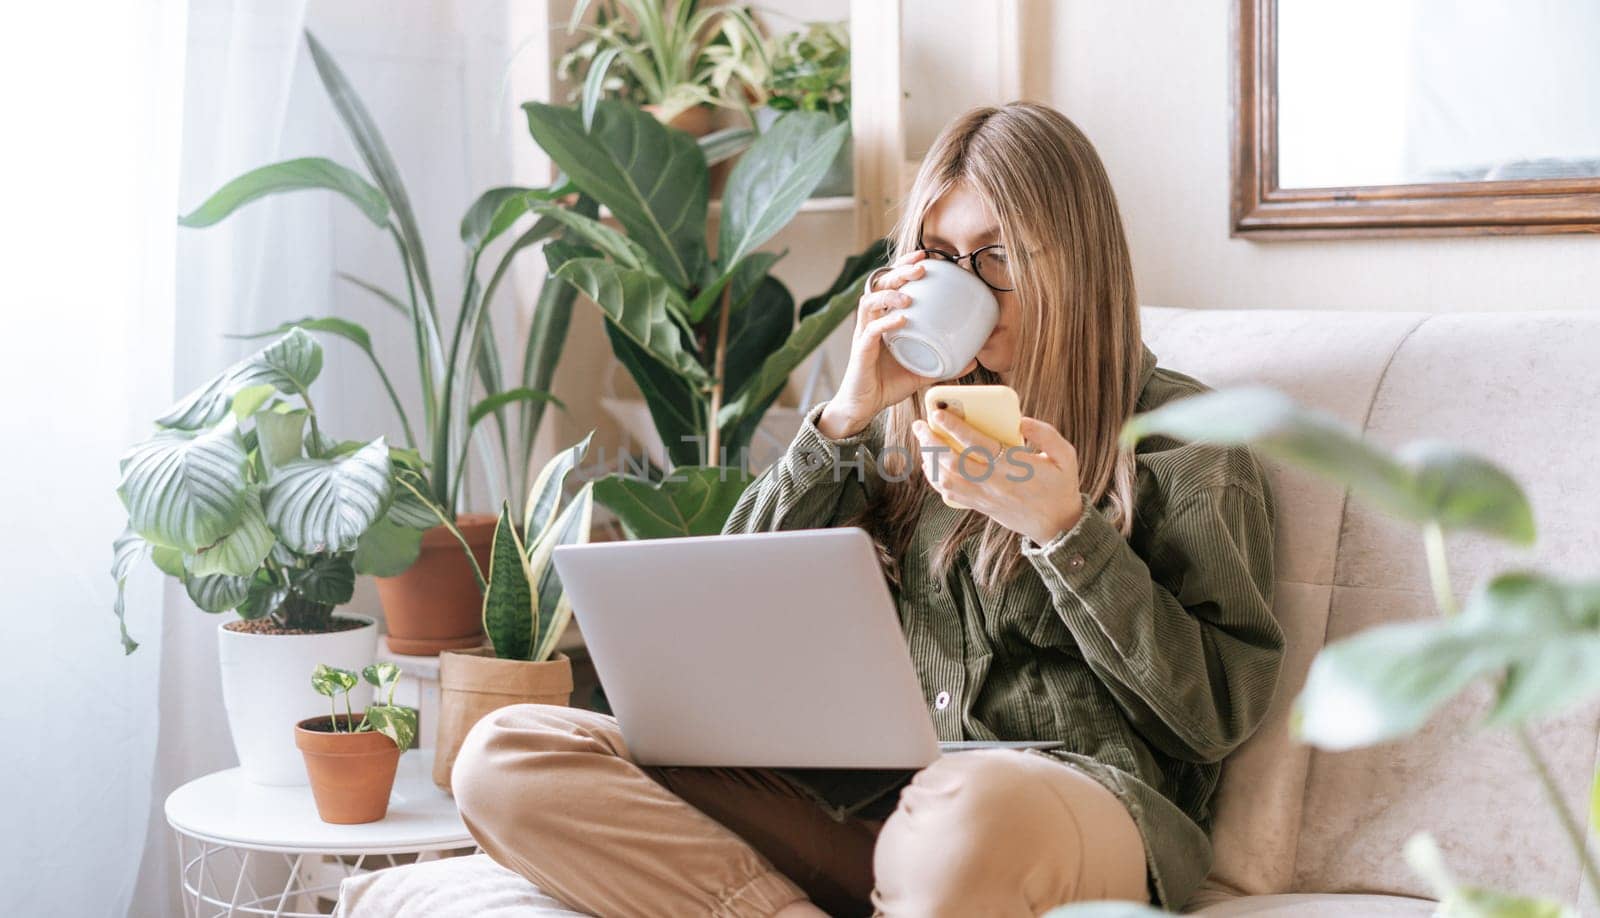 Freelance woman in glasses with mobile phone typing at laptop and working from home office. Happy girl sitting on couch in living room with plants. Distance learning online education and work.